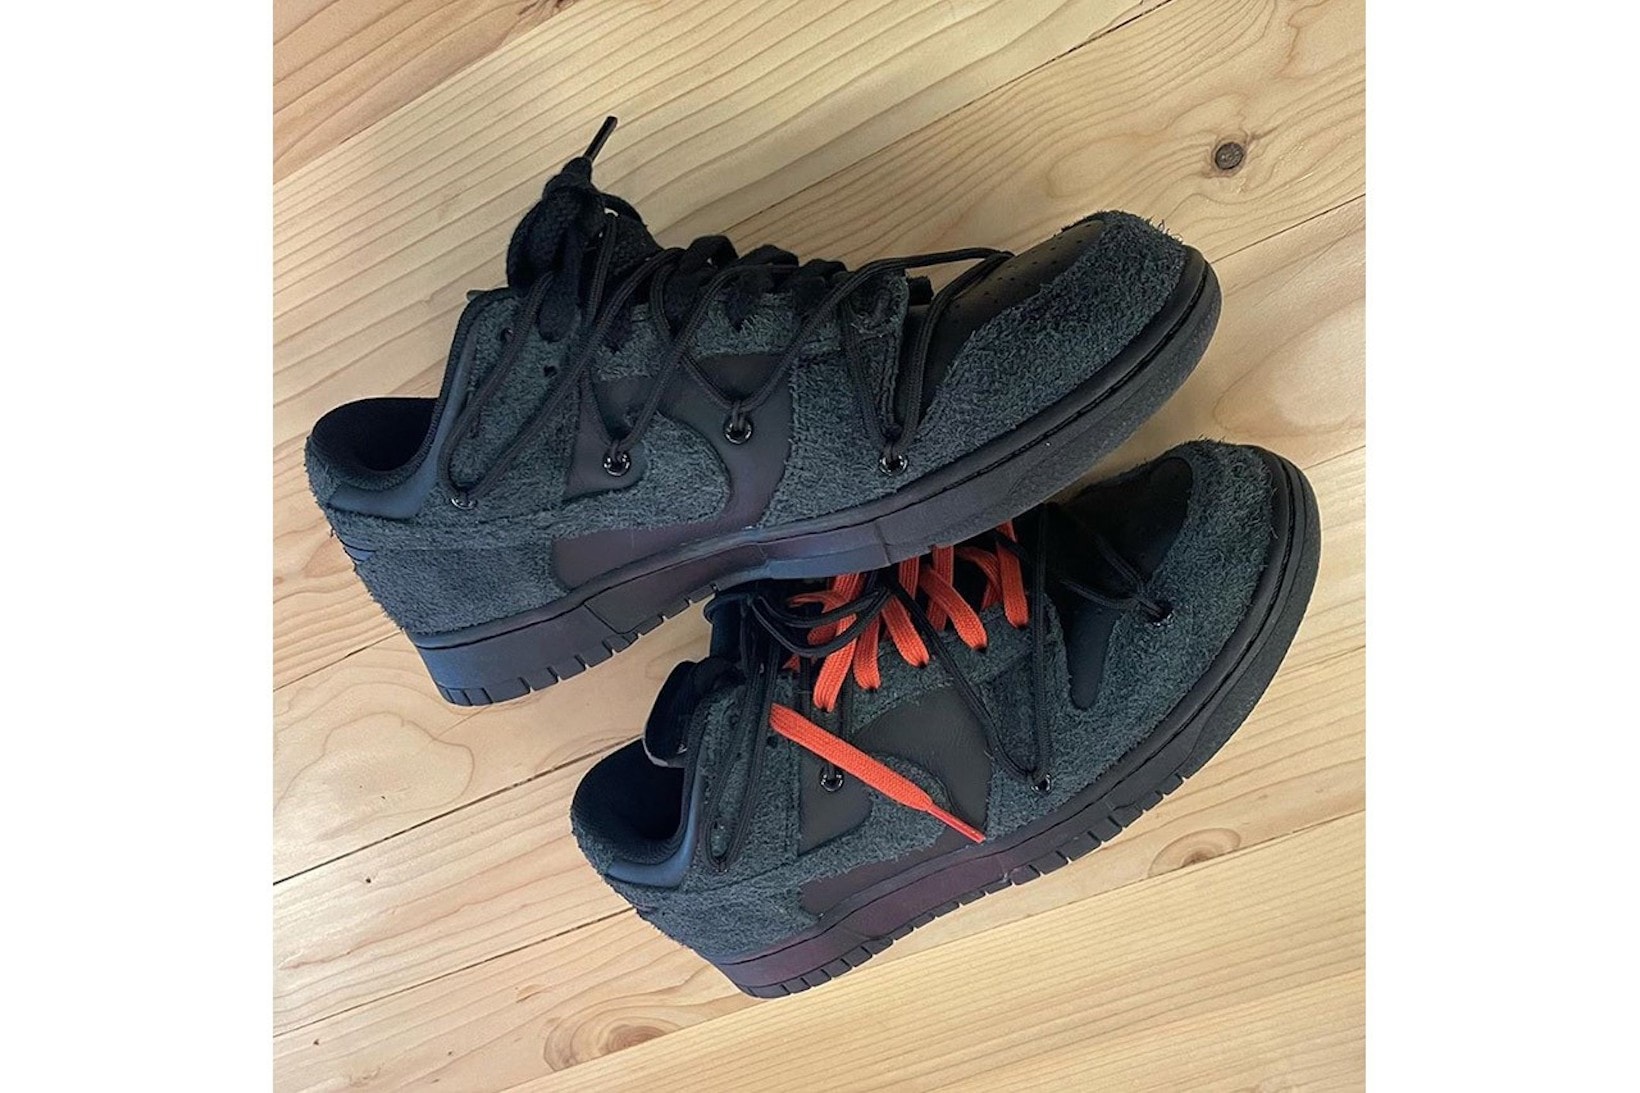 HOW TO WEAR THE AIR JORDAN 5 VIRGIL ABLOH OFF WHITE (DOs and DONTs